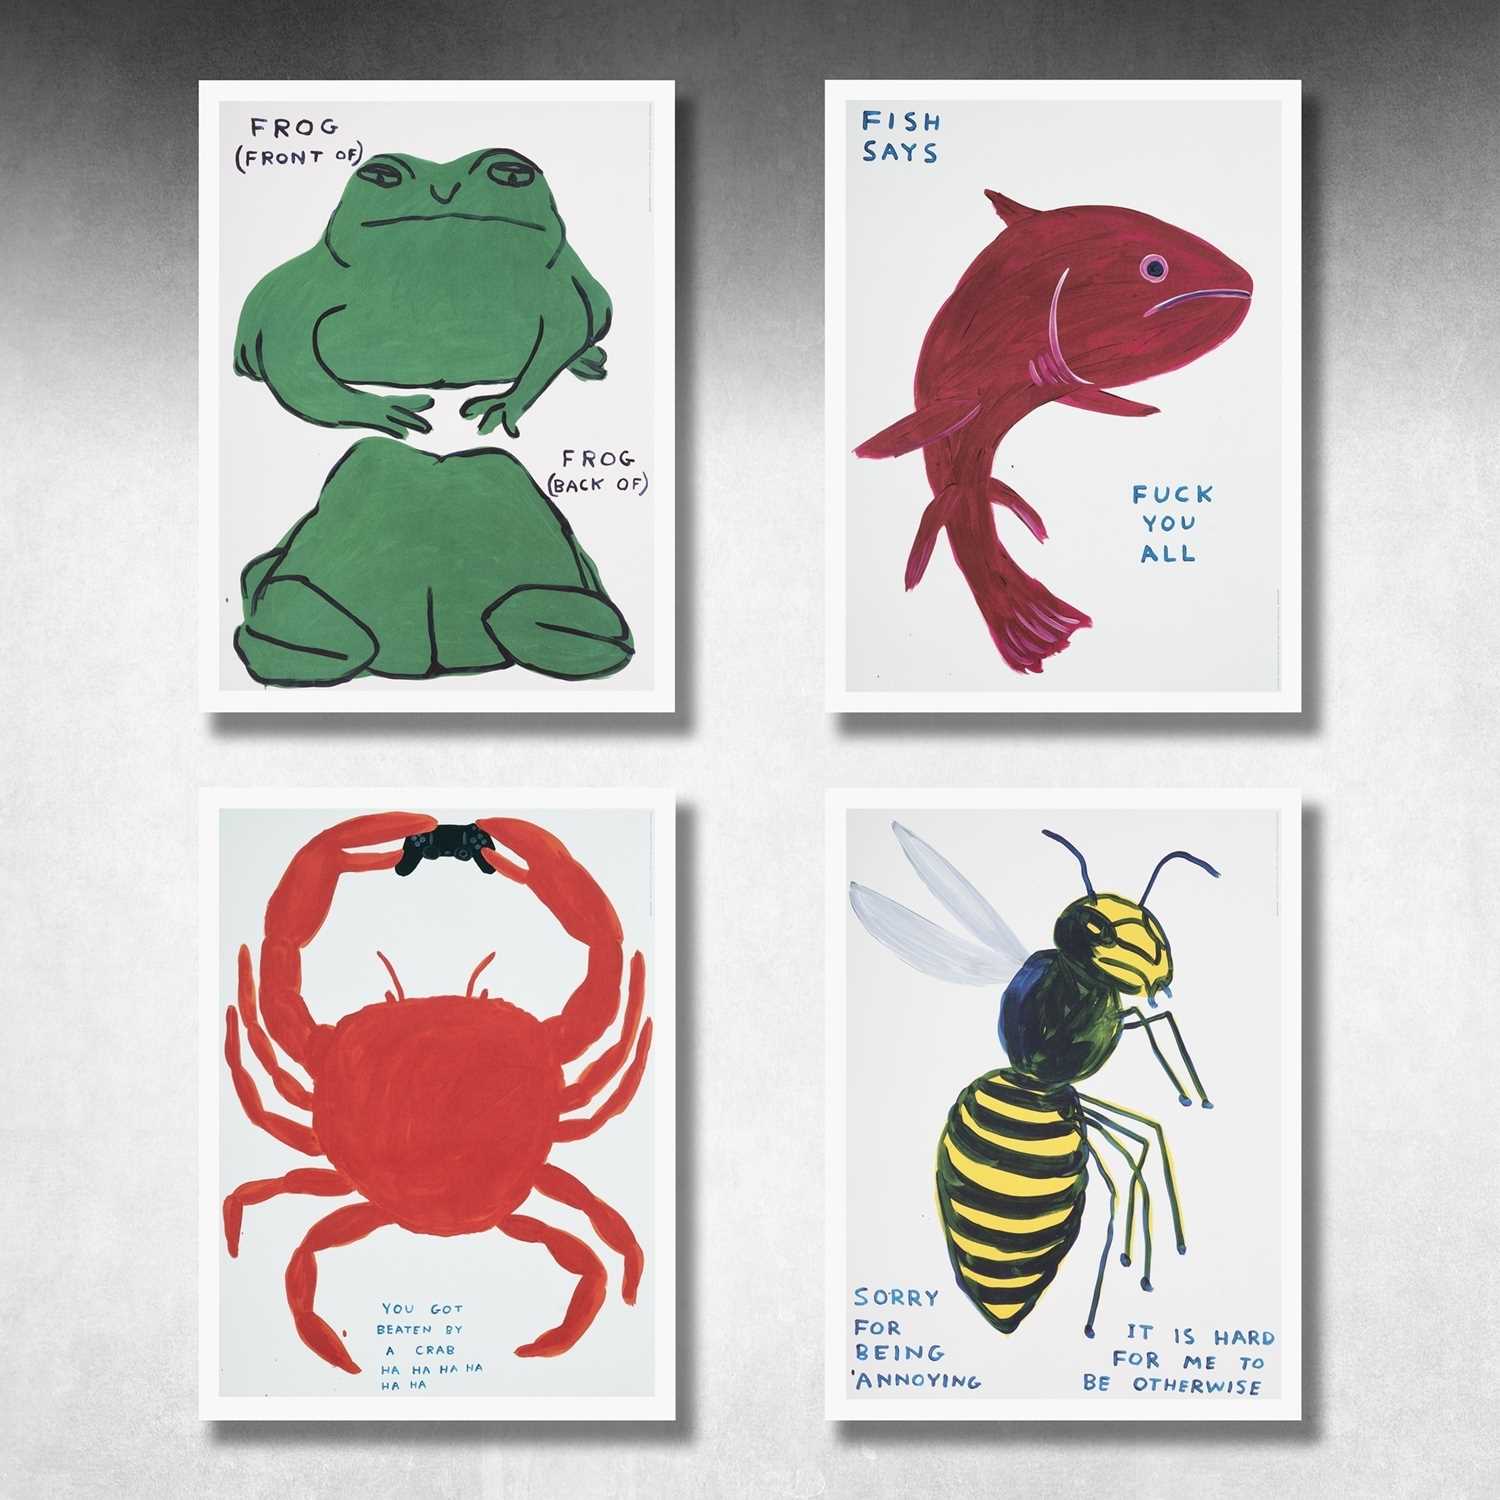 Lot 58 - David Shrigley (British 1968-), 'Fish Says Fuck You All, Frog (Front Of) Frog (Back Of), Sorry For Being Annoying & You Got Beaten By A Crab', 2022